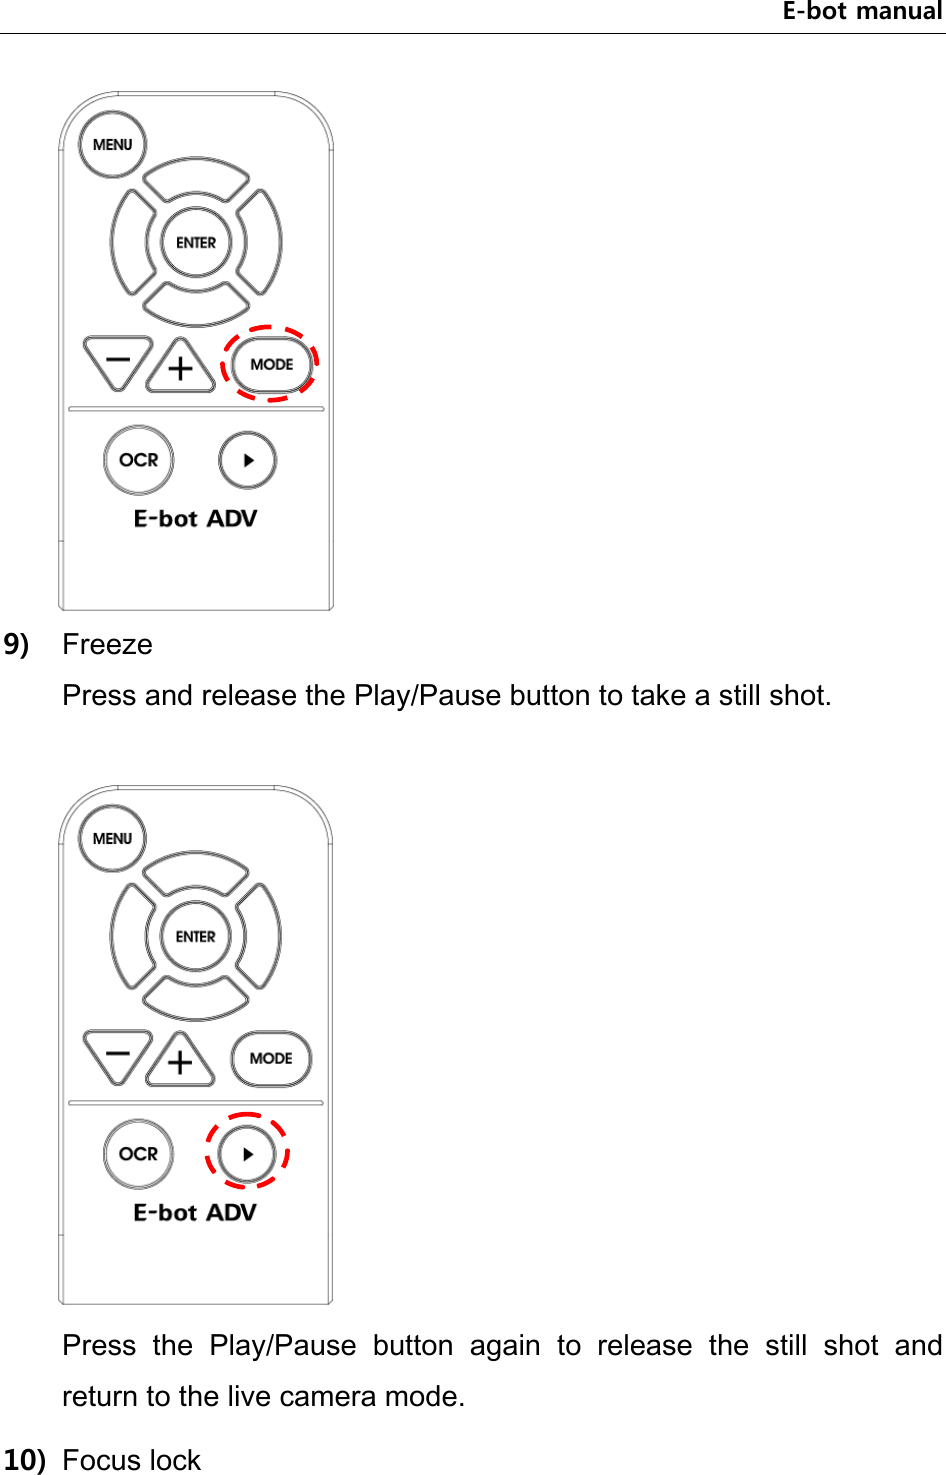 E-bot manual  9) Freeze   Press and release the Play/Pause button to take a still shot.     Press  the  Play/Pause  button  again  to  release  the  still  shot  and return to the live camera mode.   10) Focus lock 